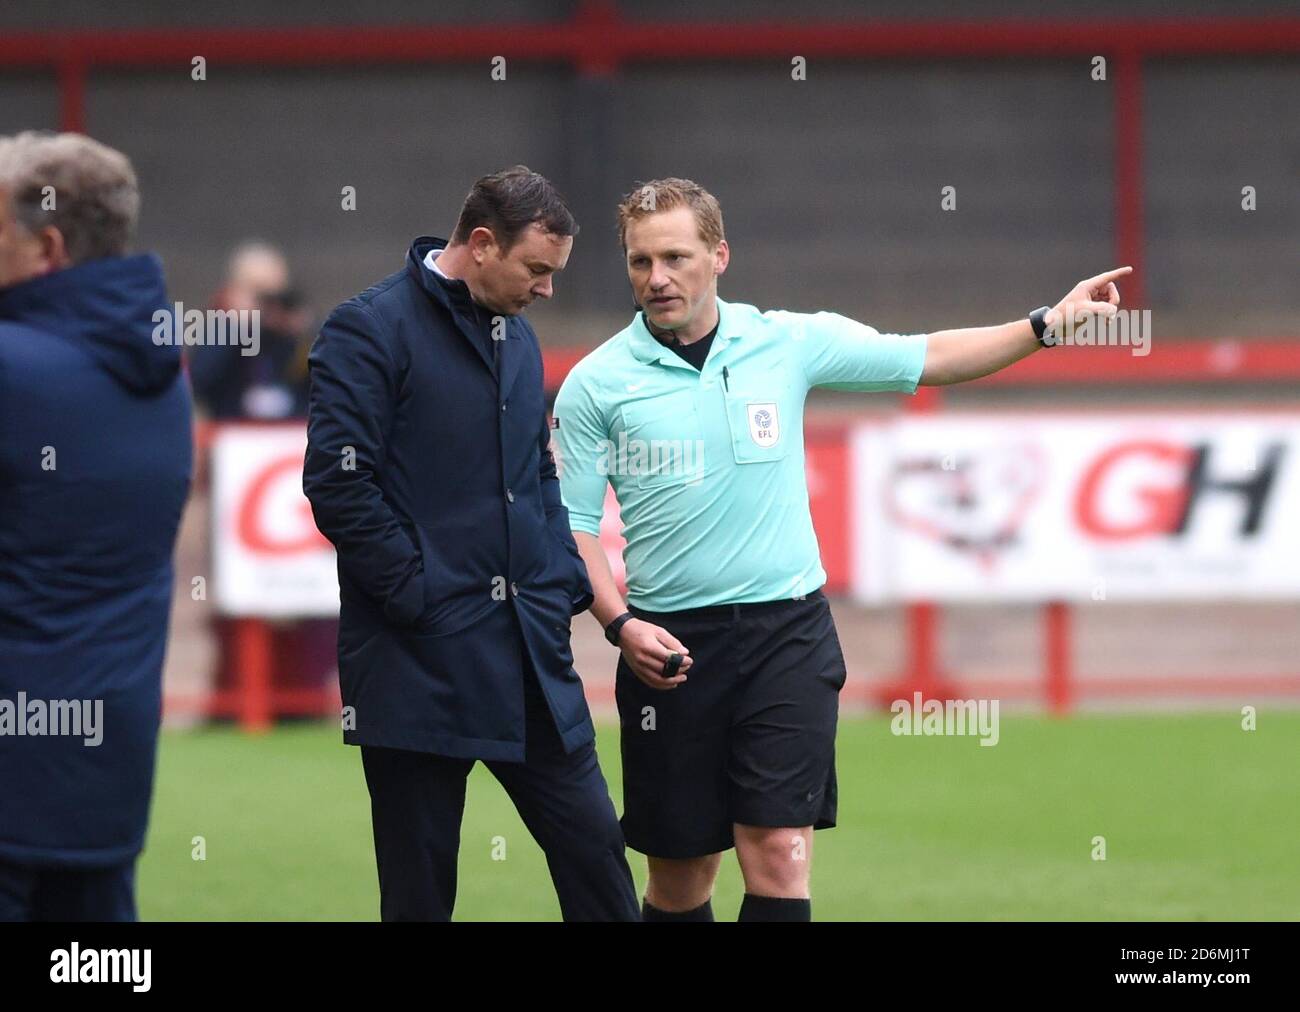 Referee John Busby with Morecambe manager Derek Adams during the League Two match between Crawley Town and Morecambe at the People's Pension Stadium  , Crawley ,  UK - 17th October 2020 - Editorial use only. No merchandising. For Football images FA and Premier League restrictions apply inc. no internet/mobile usage without FAPL license - for details contact Football Dataco Stock Photo